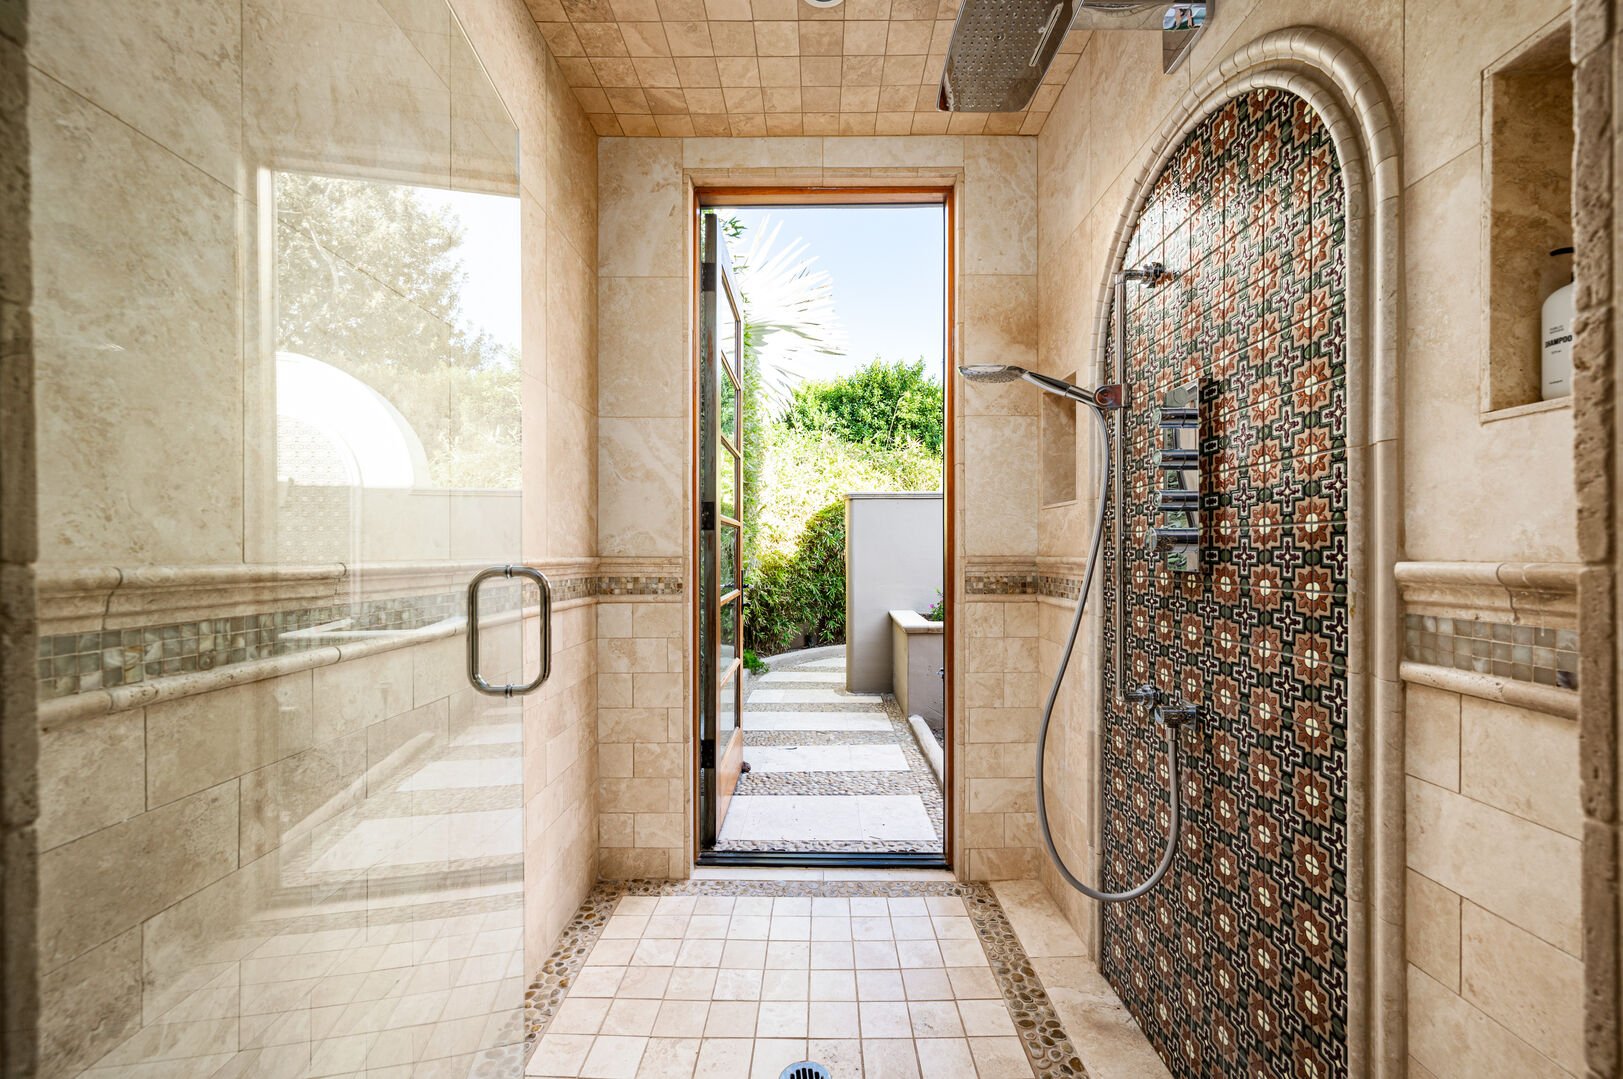 Shower that leads to the outdoor shower!